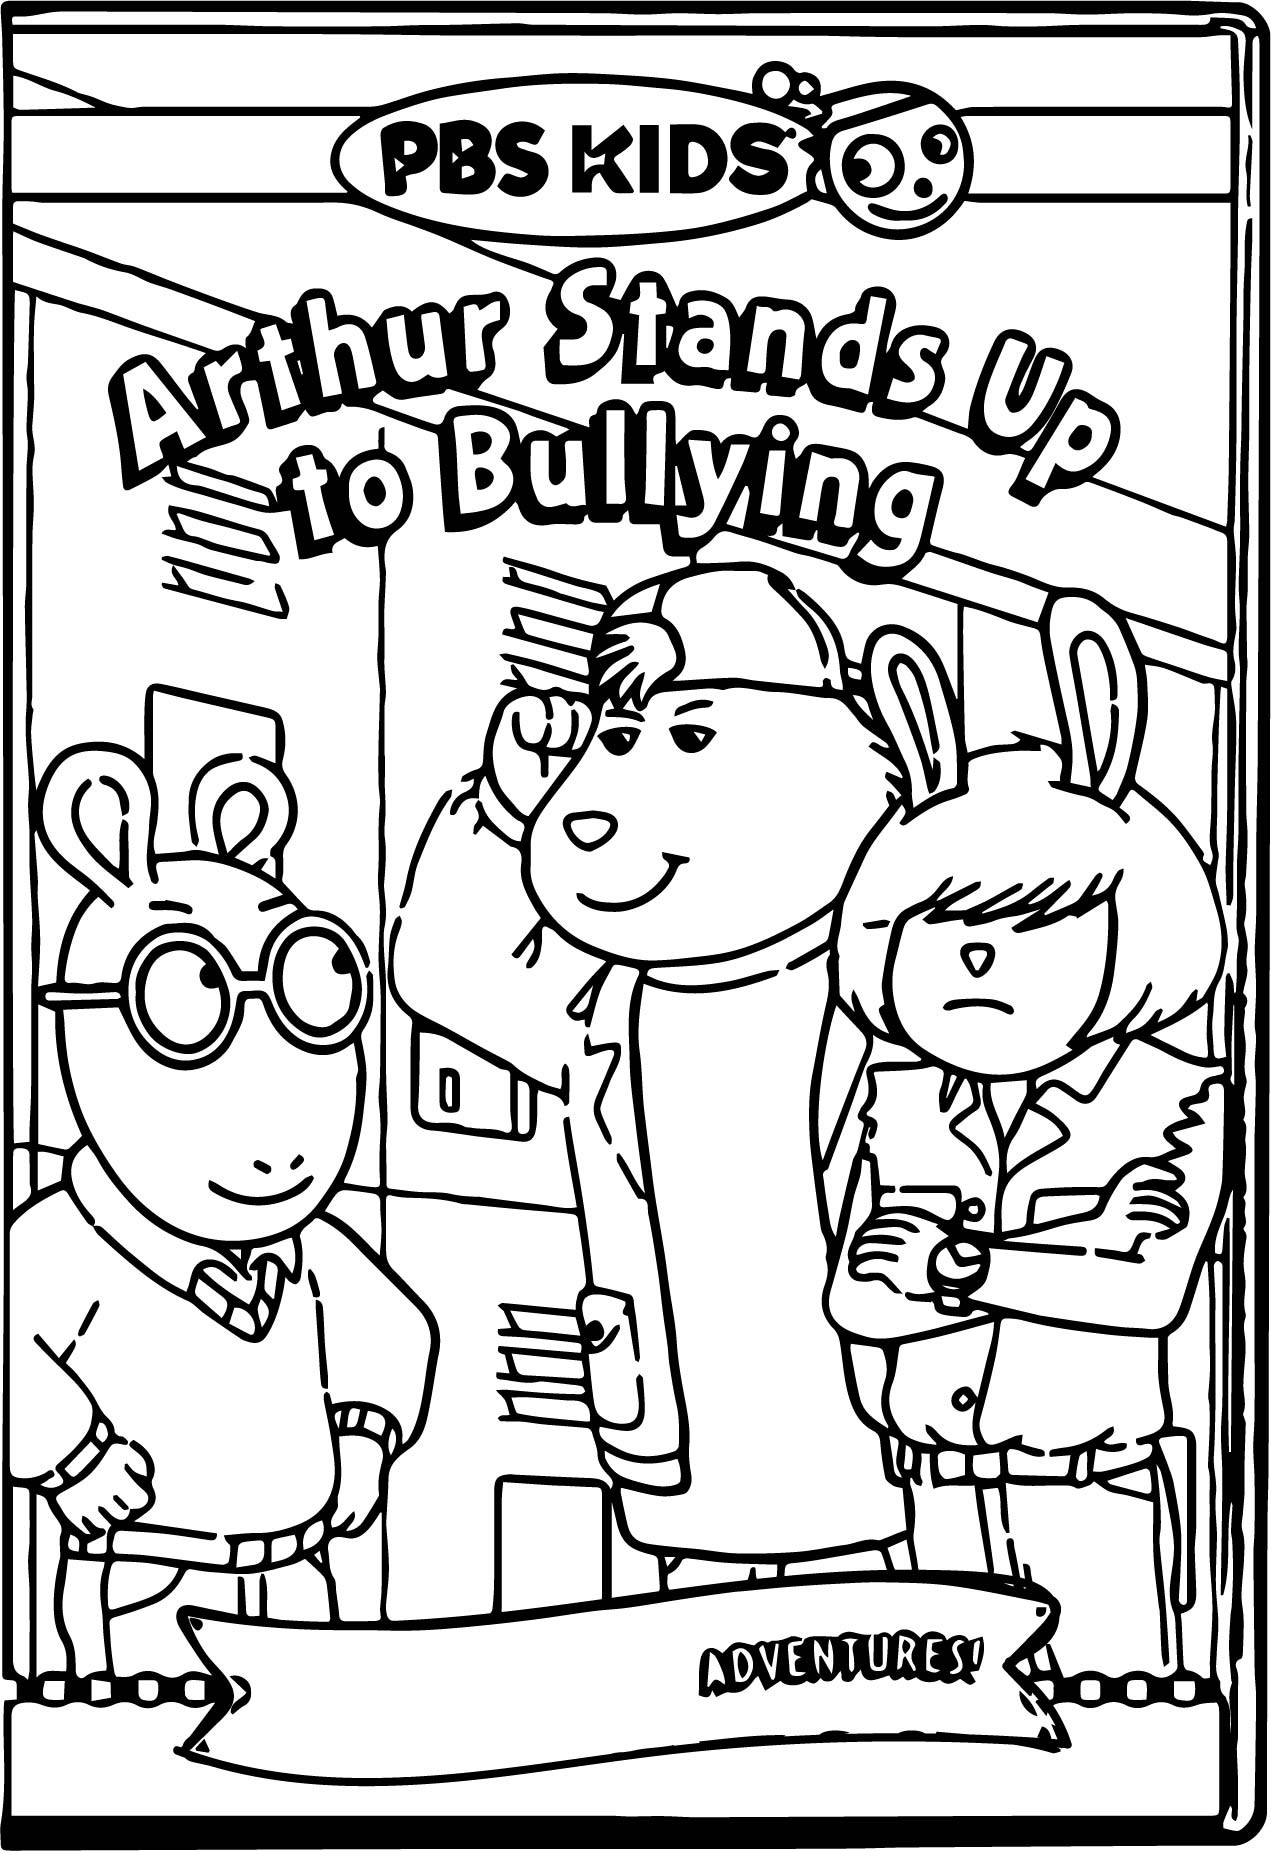 Pbskids.Org Coloring Pages
 Arthur Pbs Kids Coloring Pages